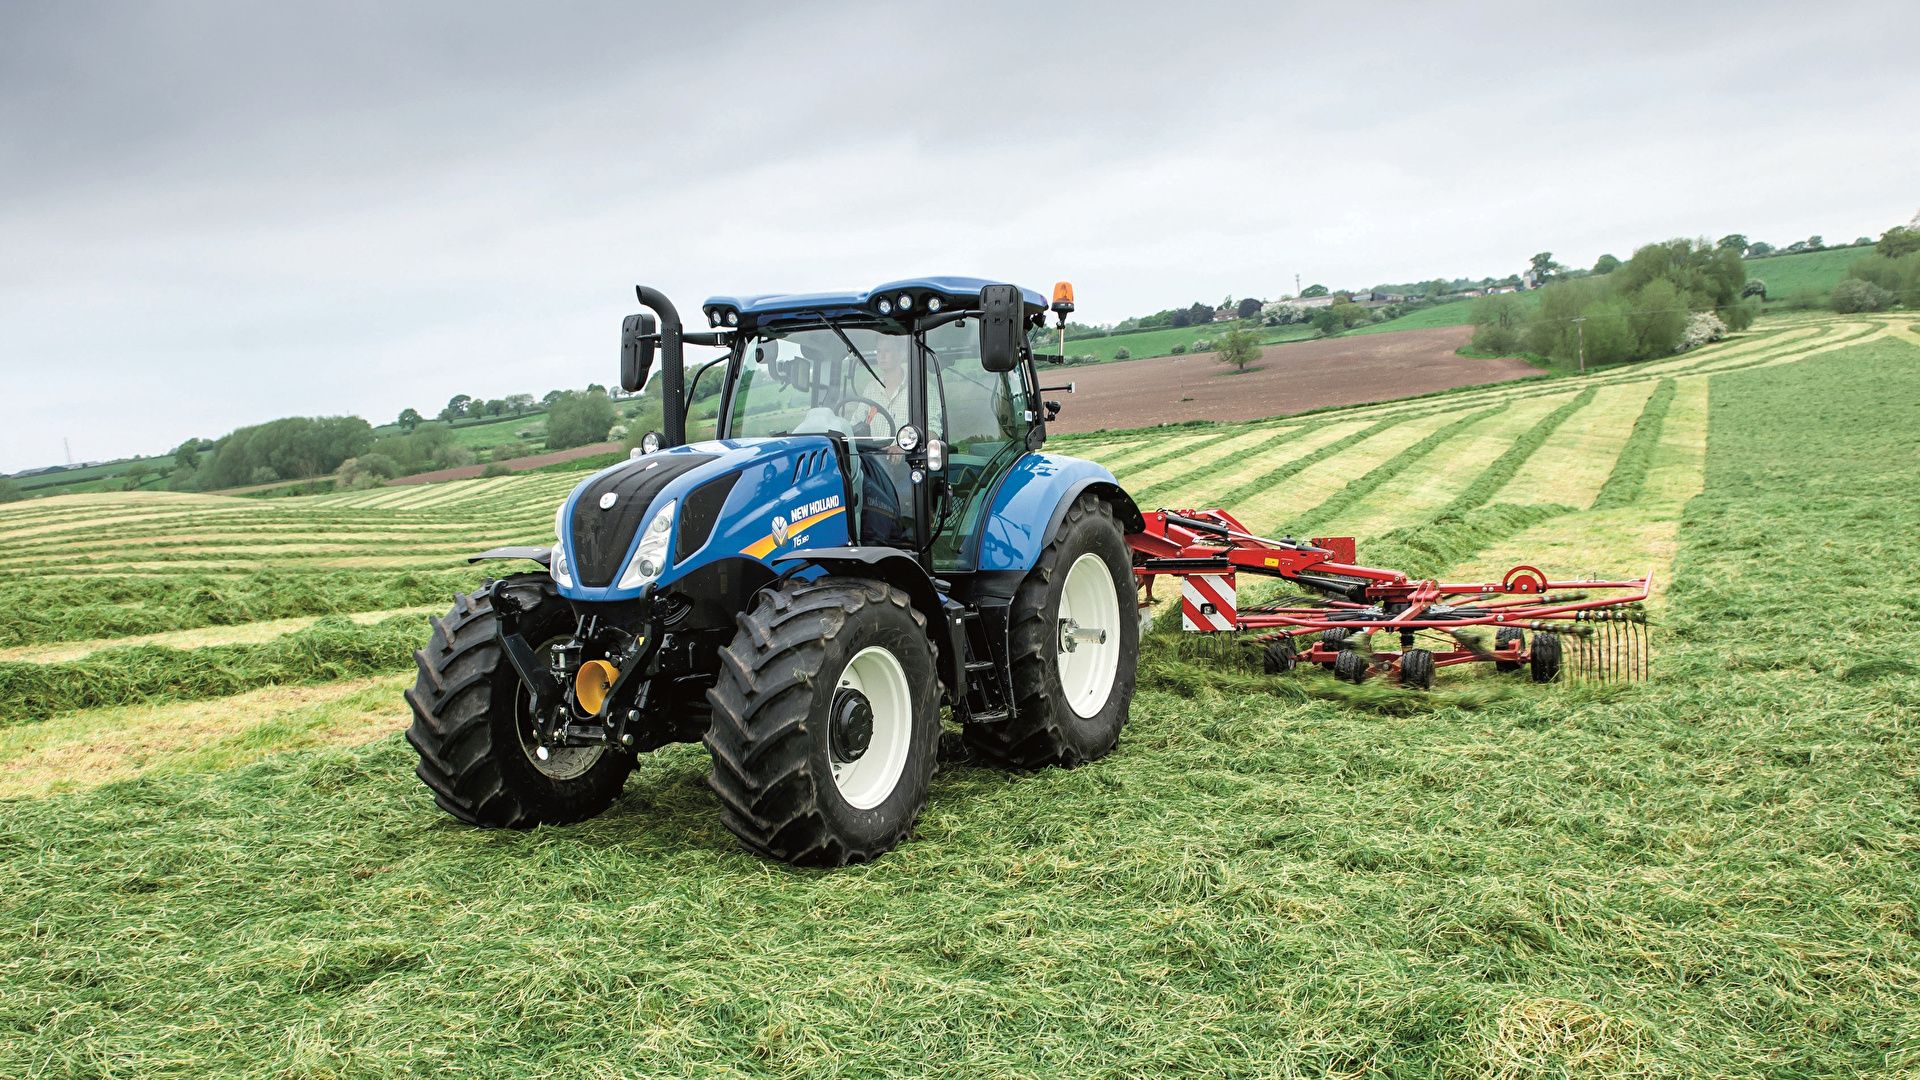 Picture Tractor 2015 16 New Holland T6.180 Fields 1920x1080